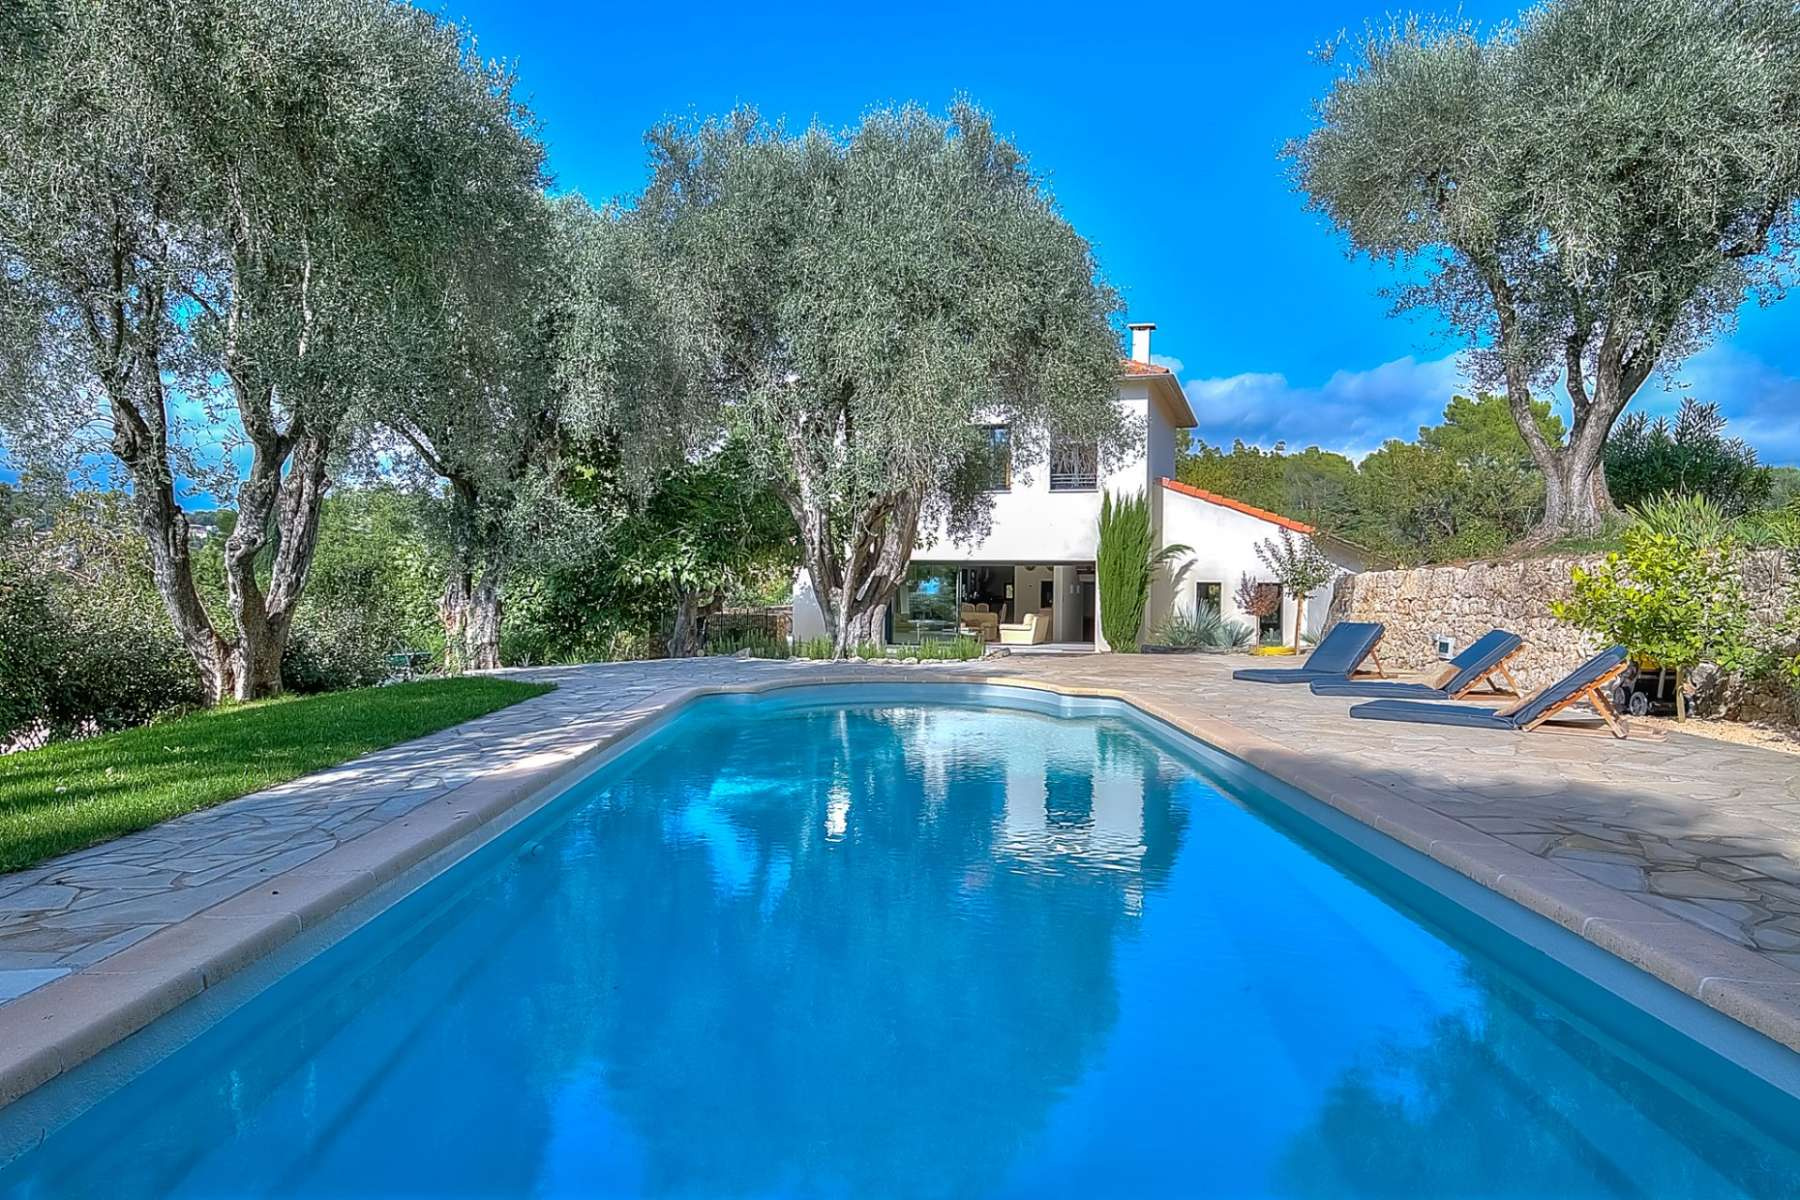 Family villa with panoramic views of the old village of Mougins